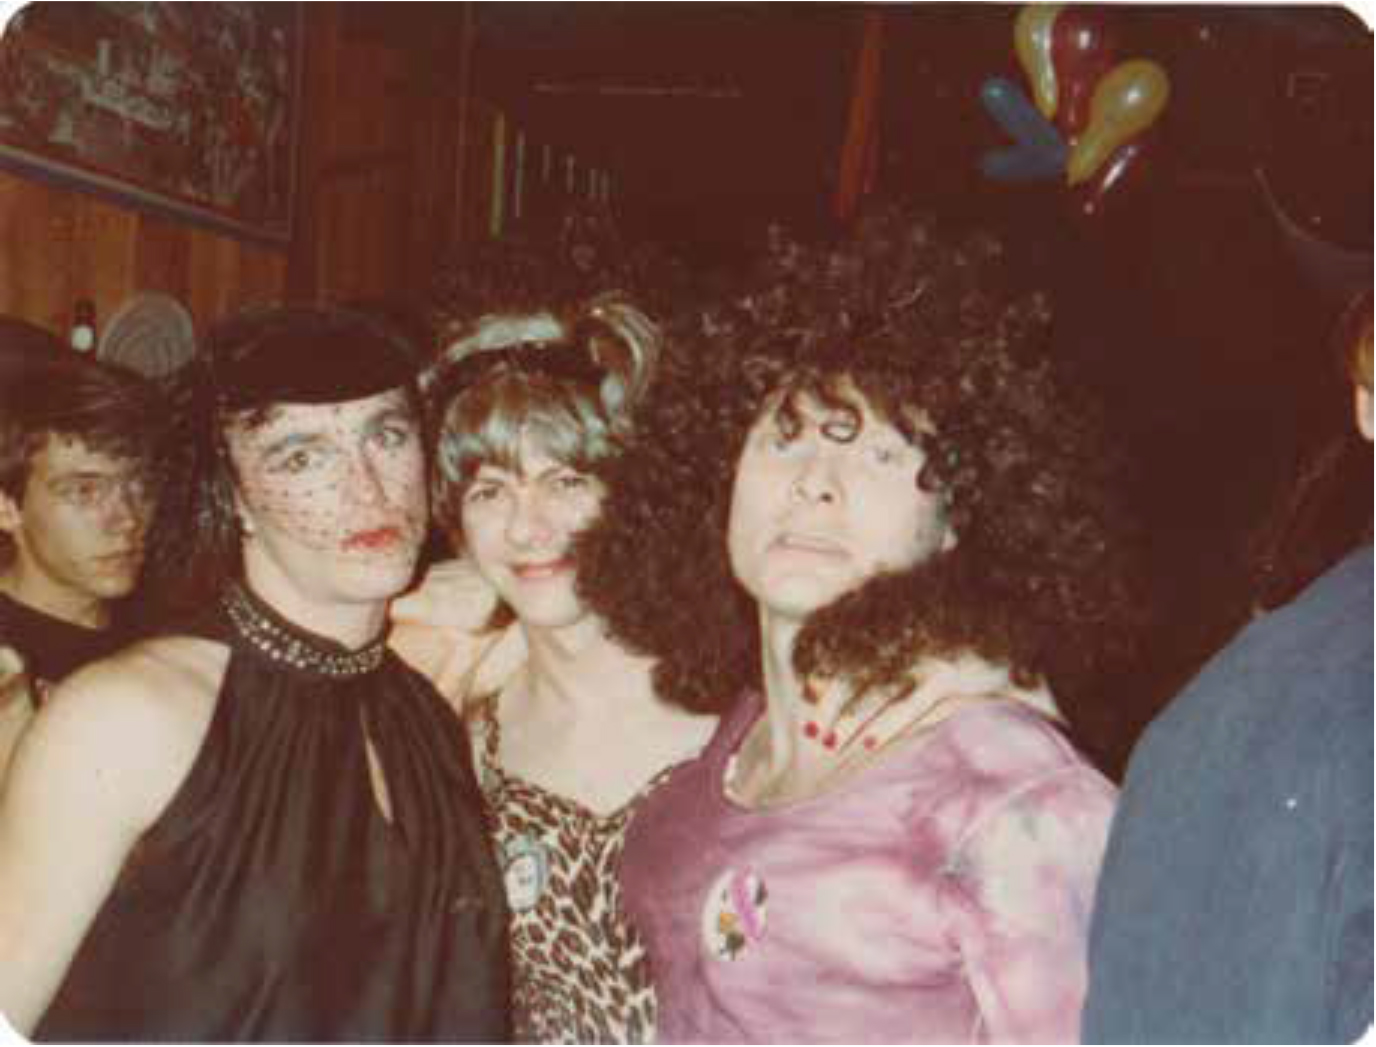 Three white people pose in fancy dress and makeup at a party